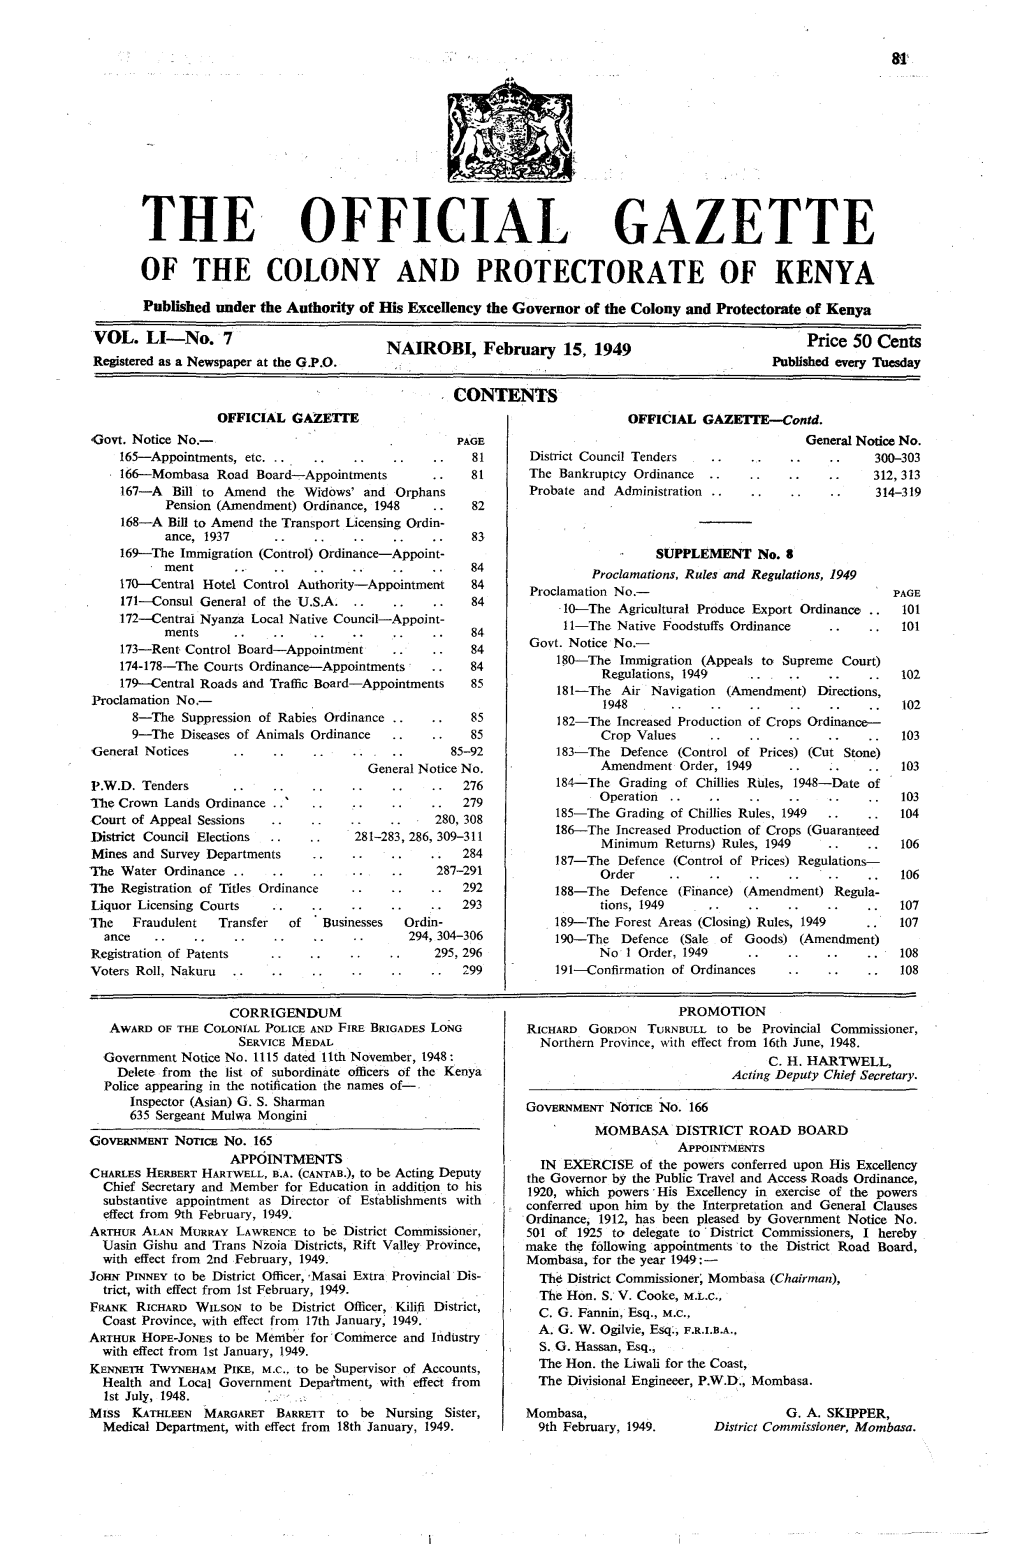 THE OFFICIAL GAZETTE of the COLONY and PROTECTORATE of KENYA Published Under the Authority of His Excellency the Governor of the Colony and Protectorate of Kenya VOL